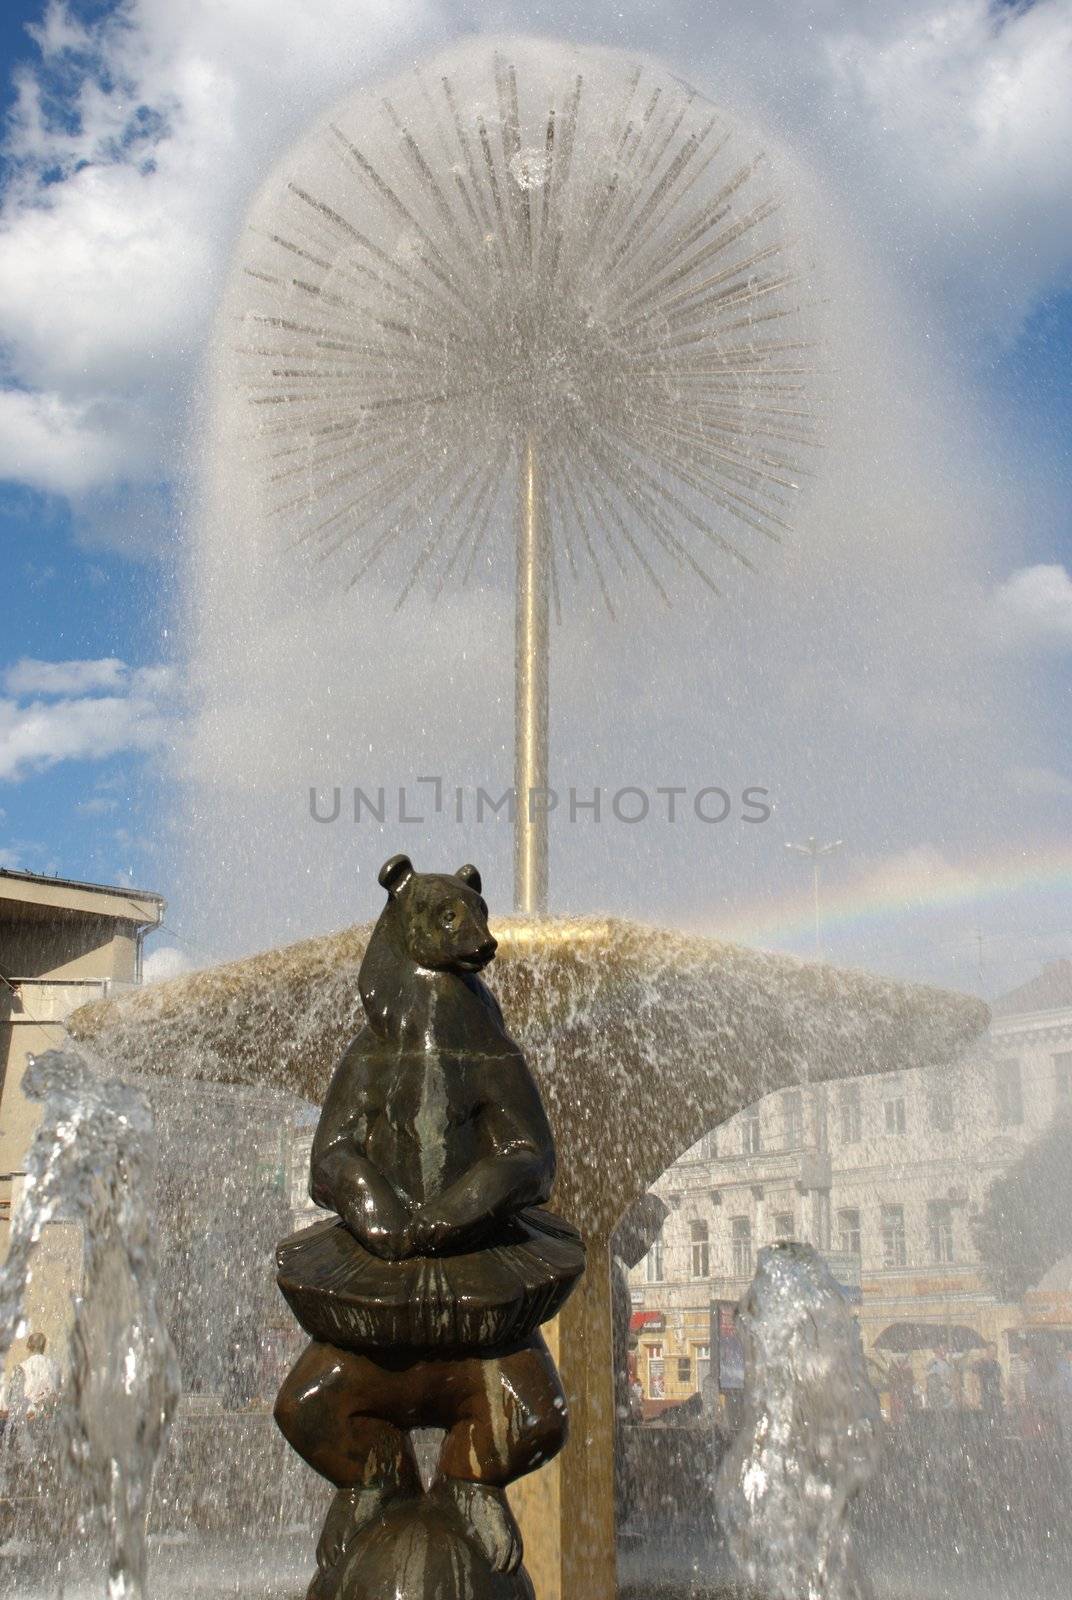 The fountain in the form of a dandelion flower by Light